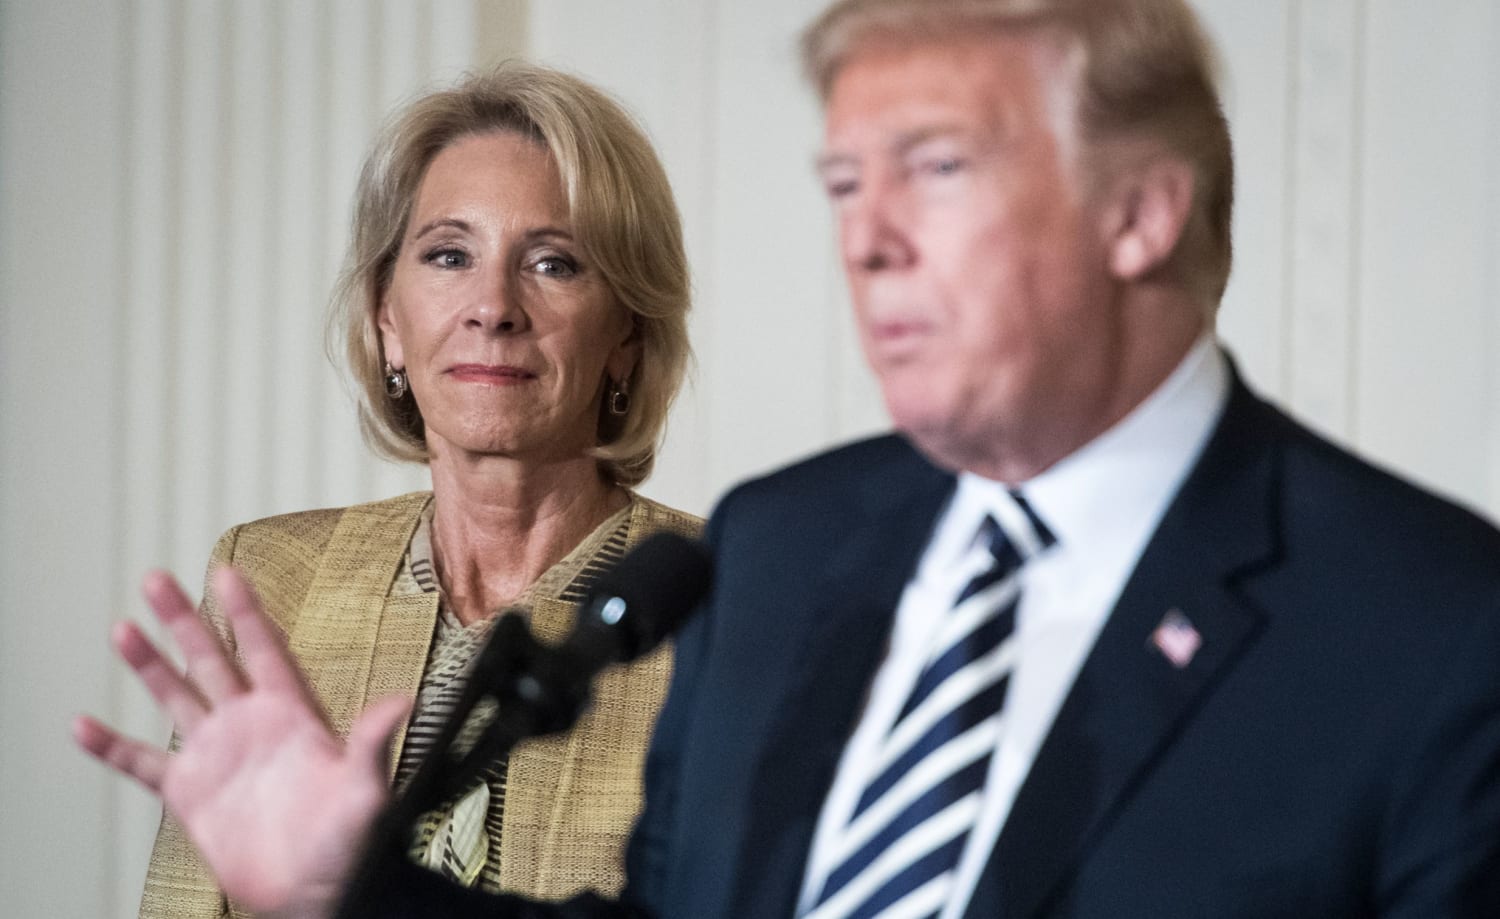 Americans disapprove of DeVos most among Trump administration officials, survey finds